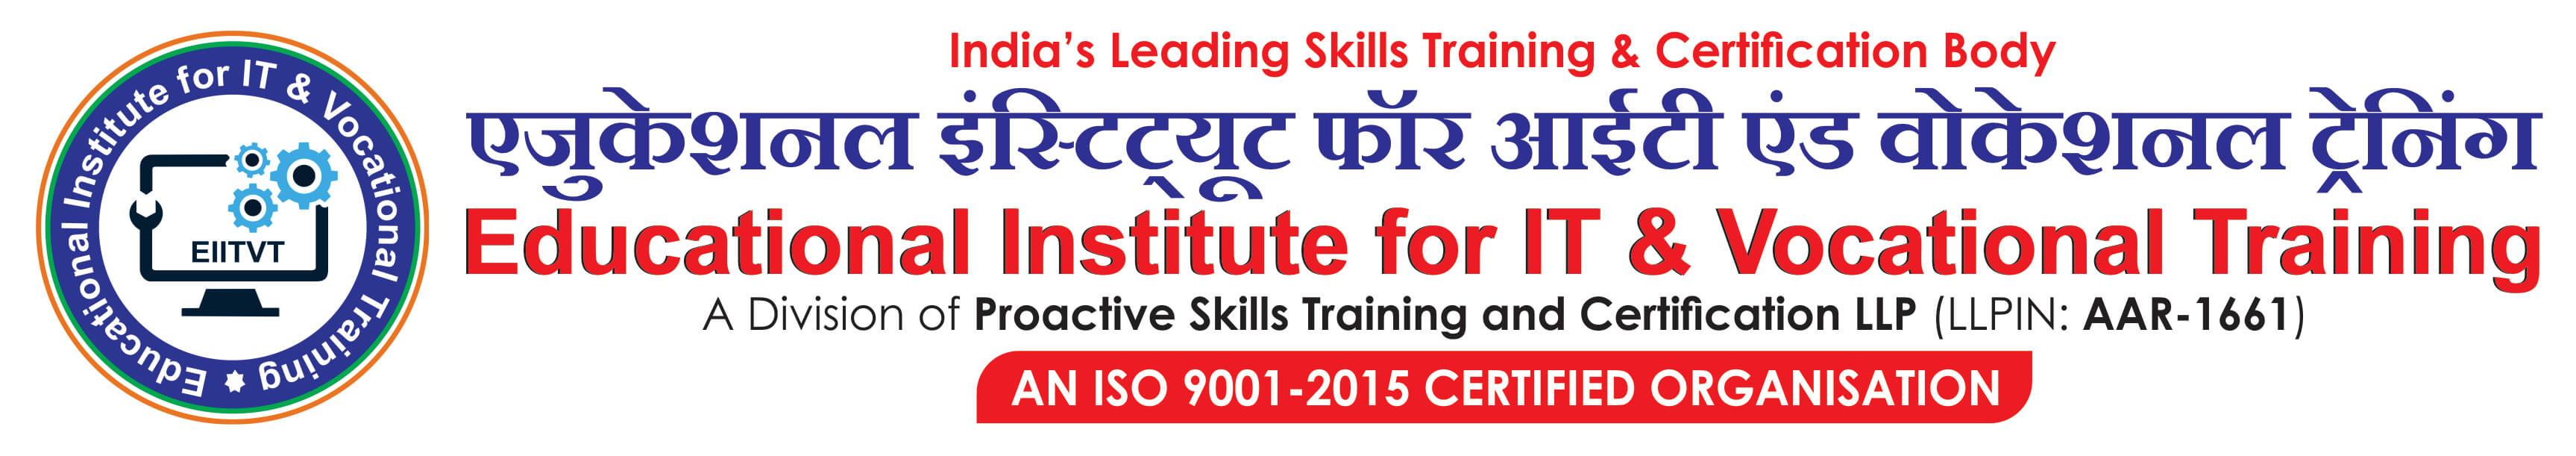 Educational Institute for IT & Vocational Training